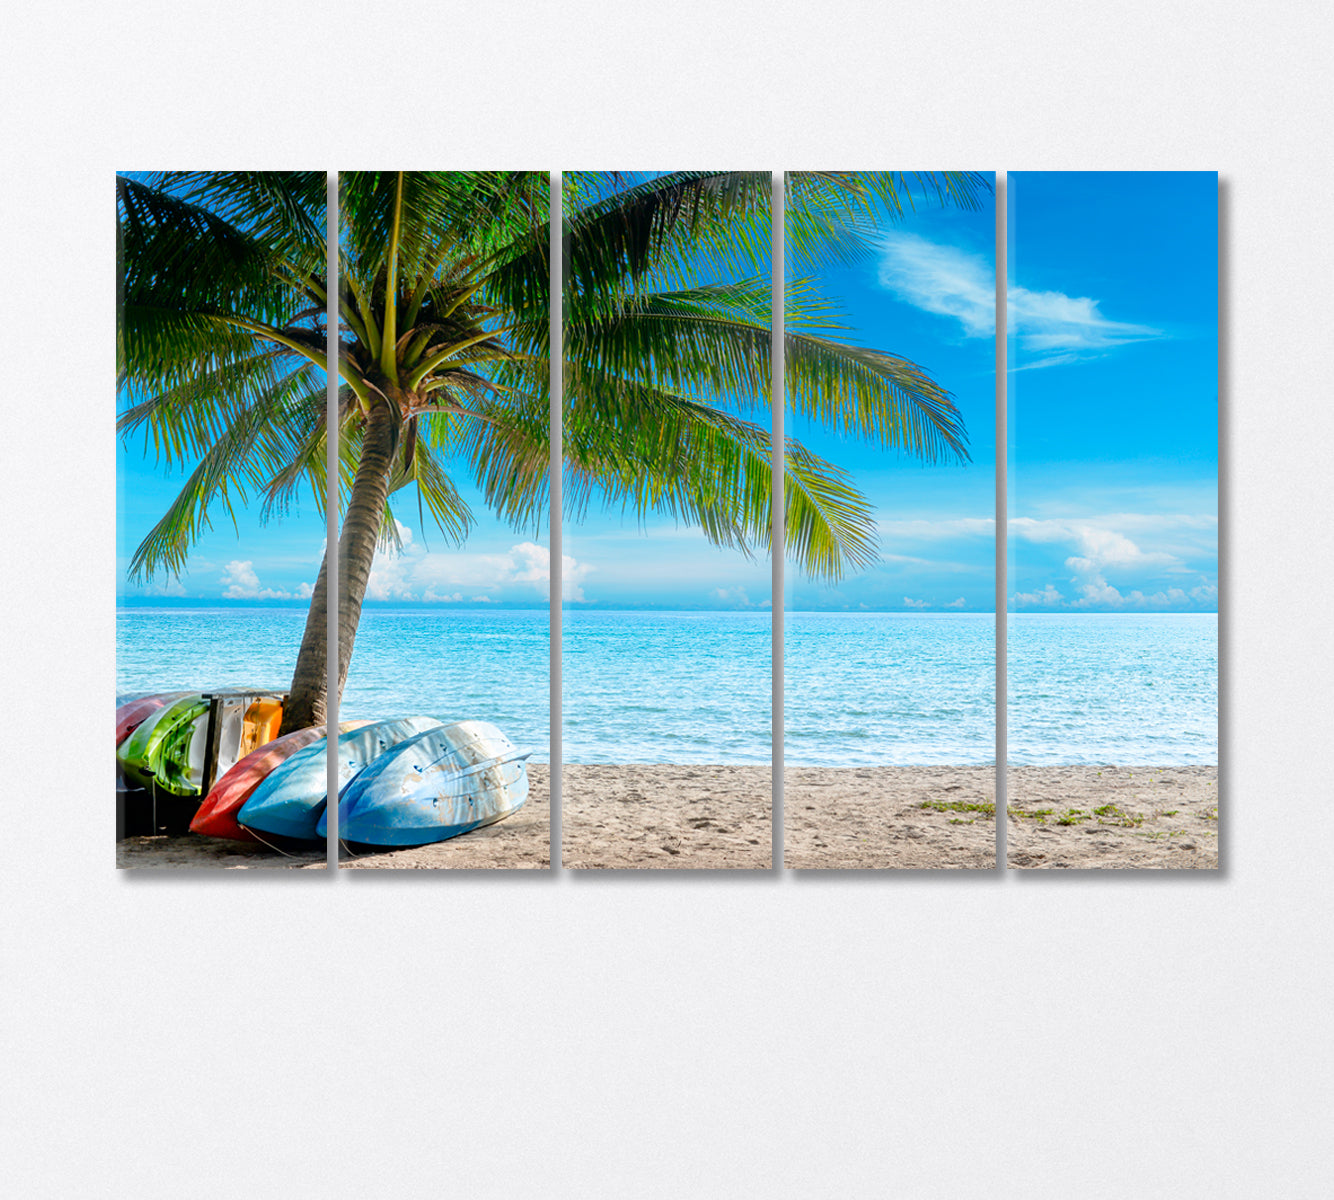 Kayak on Sunny Tropical Beach with Palm Trees Canvas Print-Canvas Print-CetArt-5 Panels-36x24 inches-CetArt